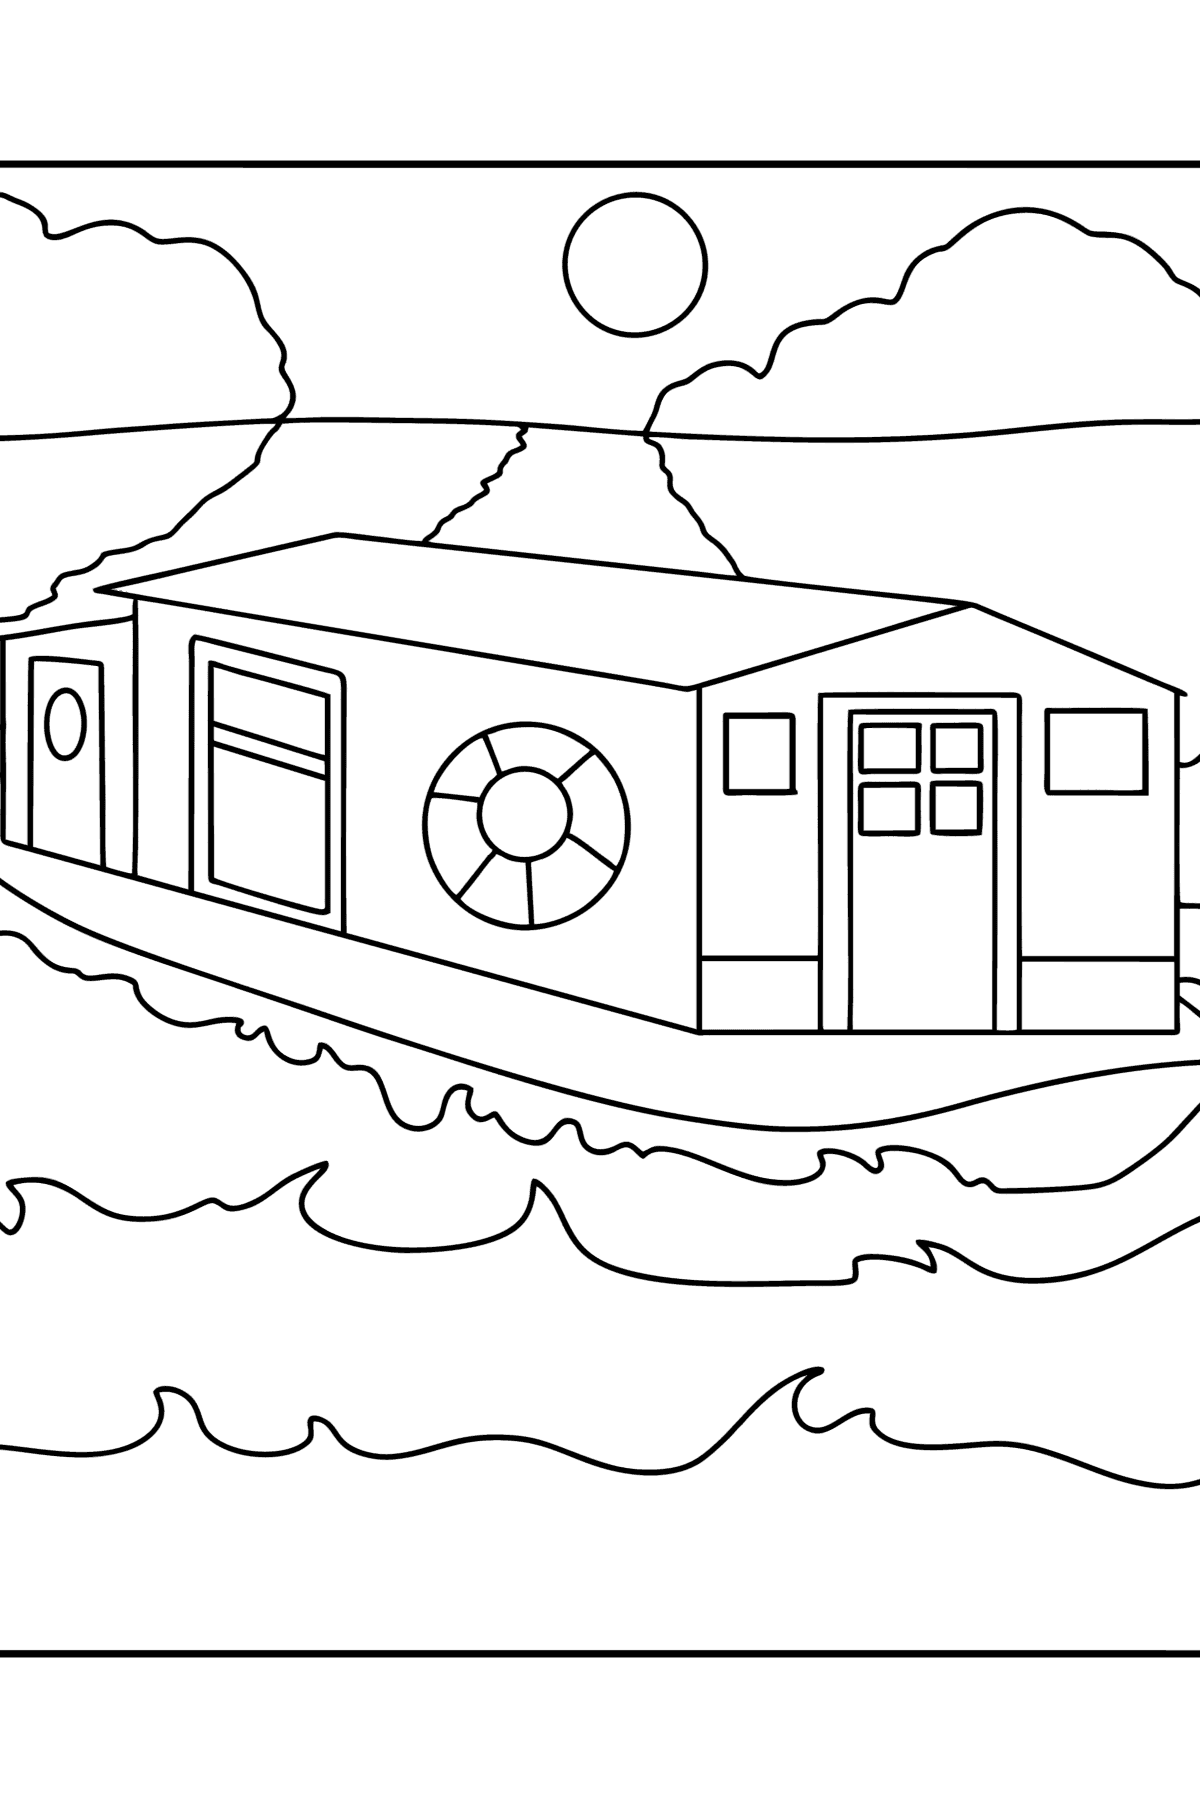 BoatHouse coloring page - Coloring Pages for Kids